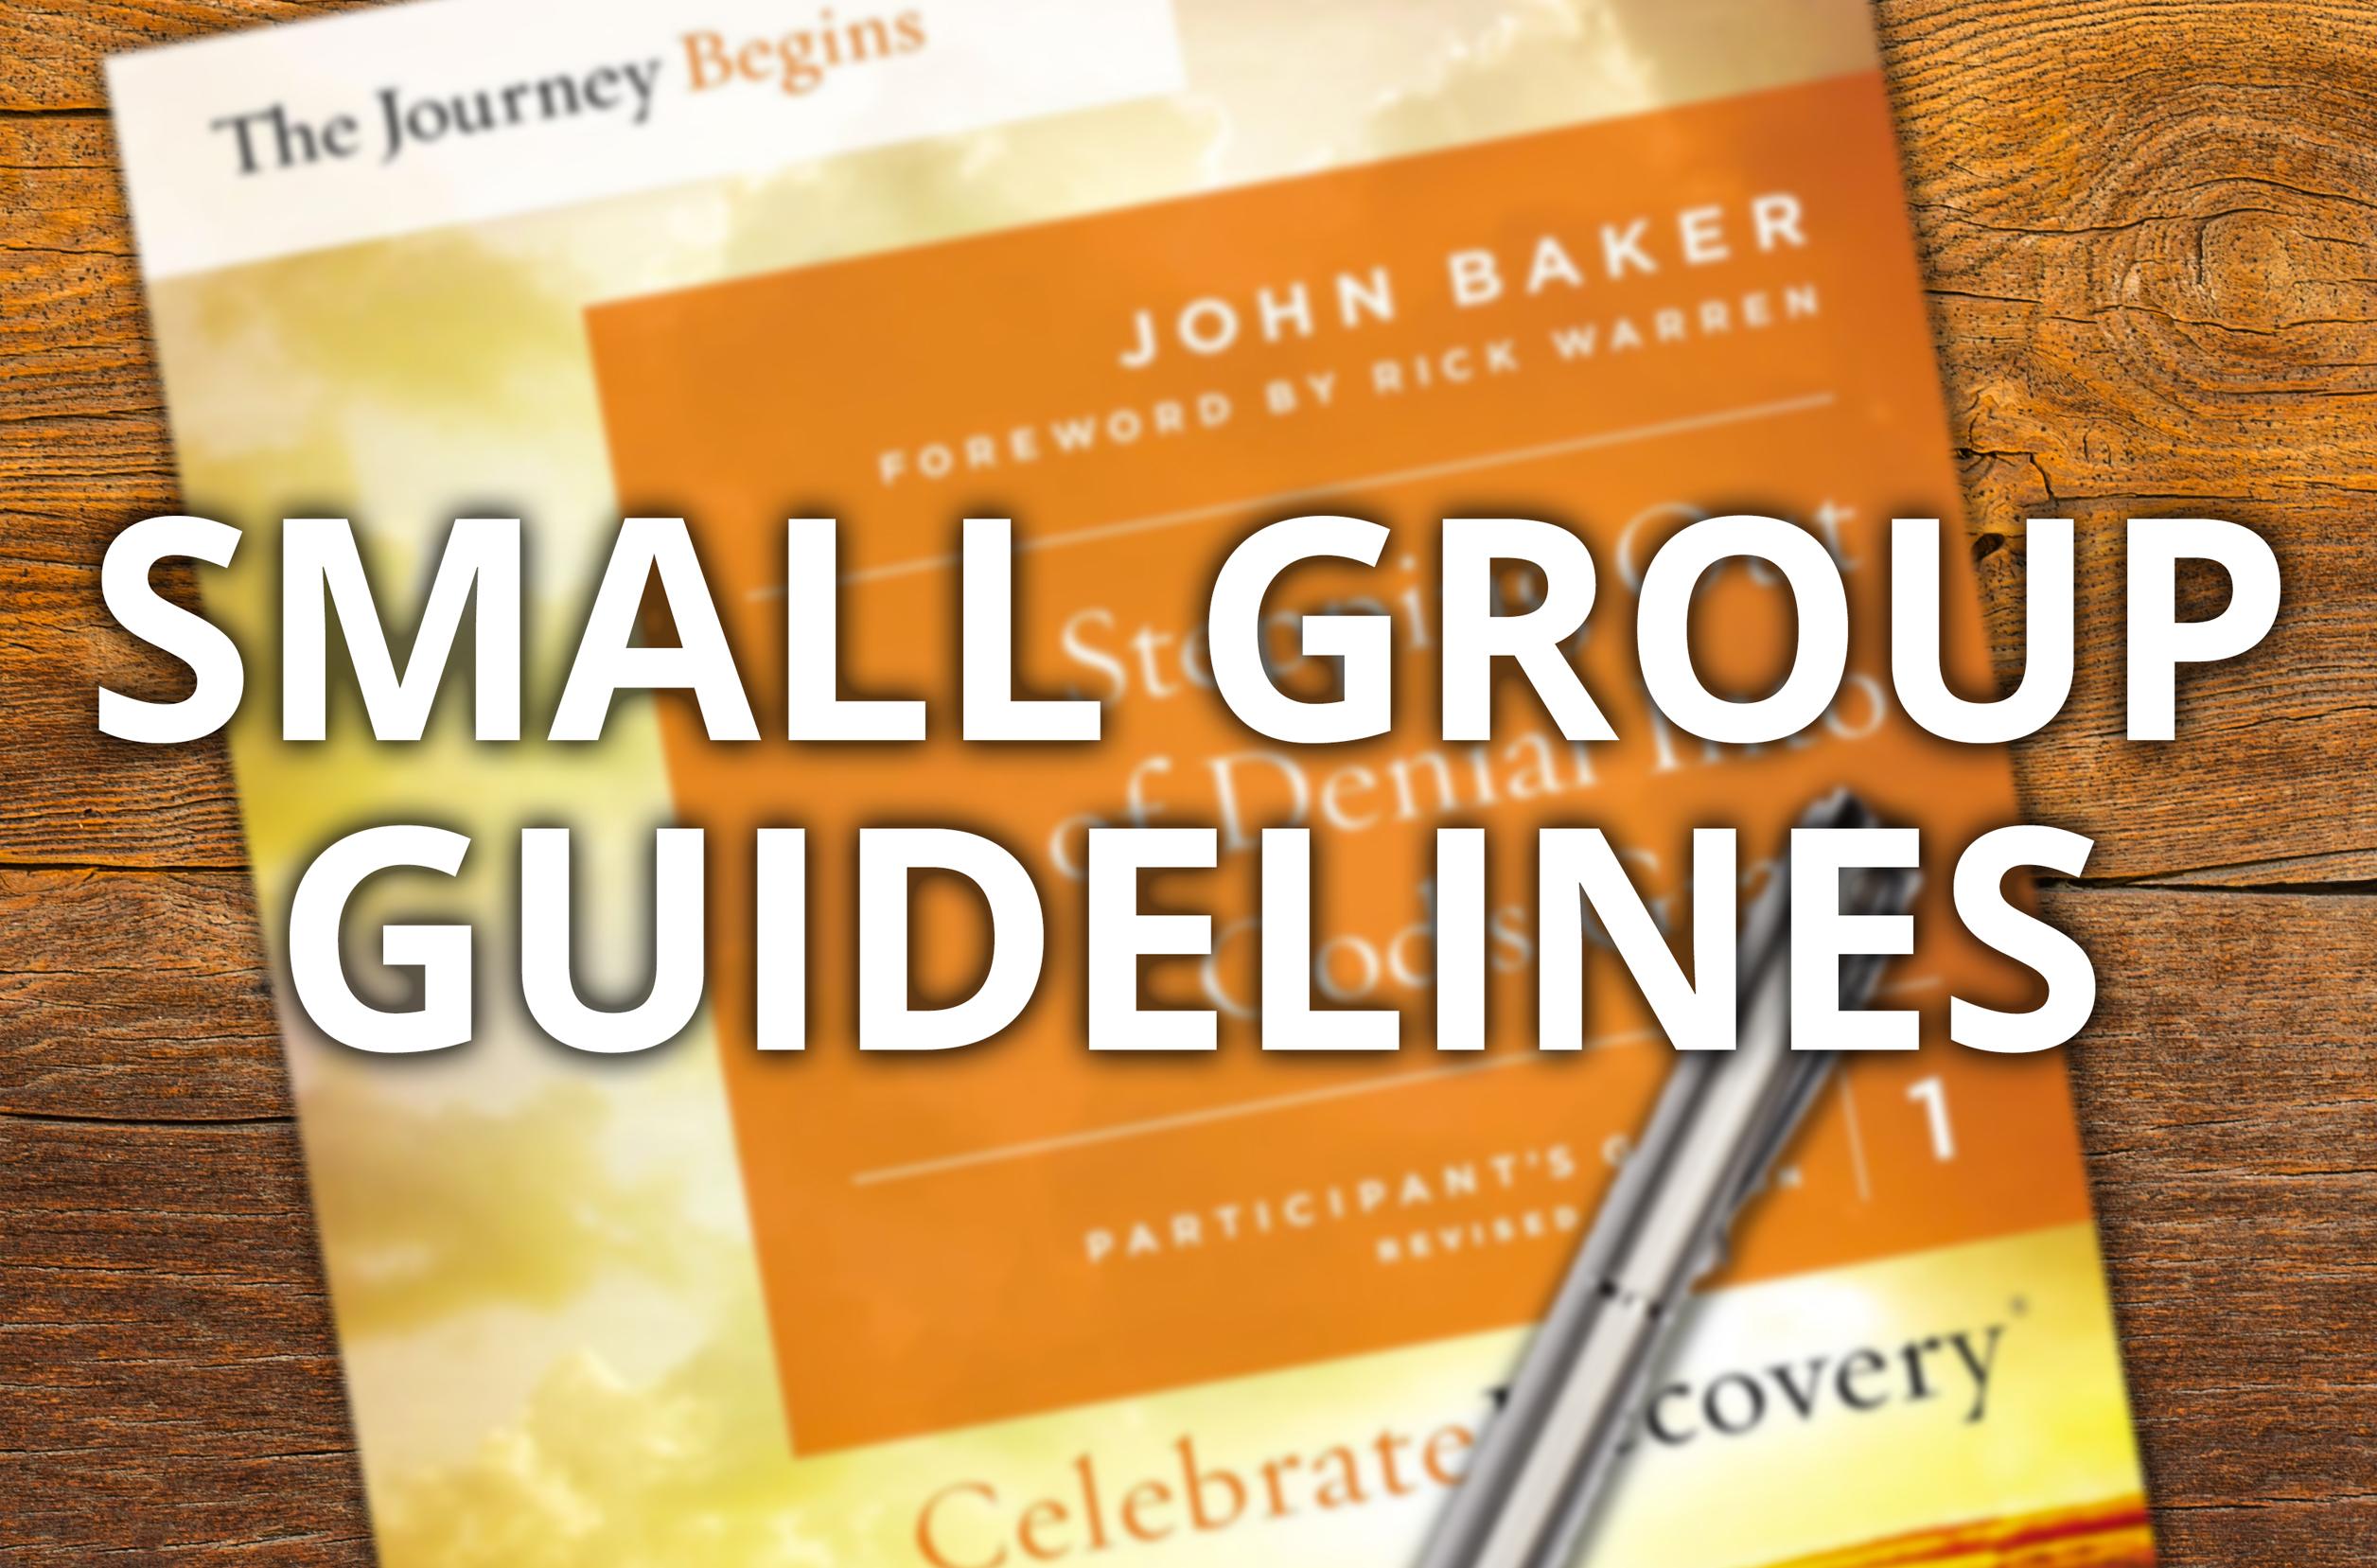 Small Group Guidelines